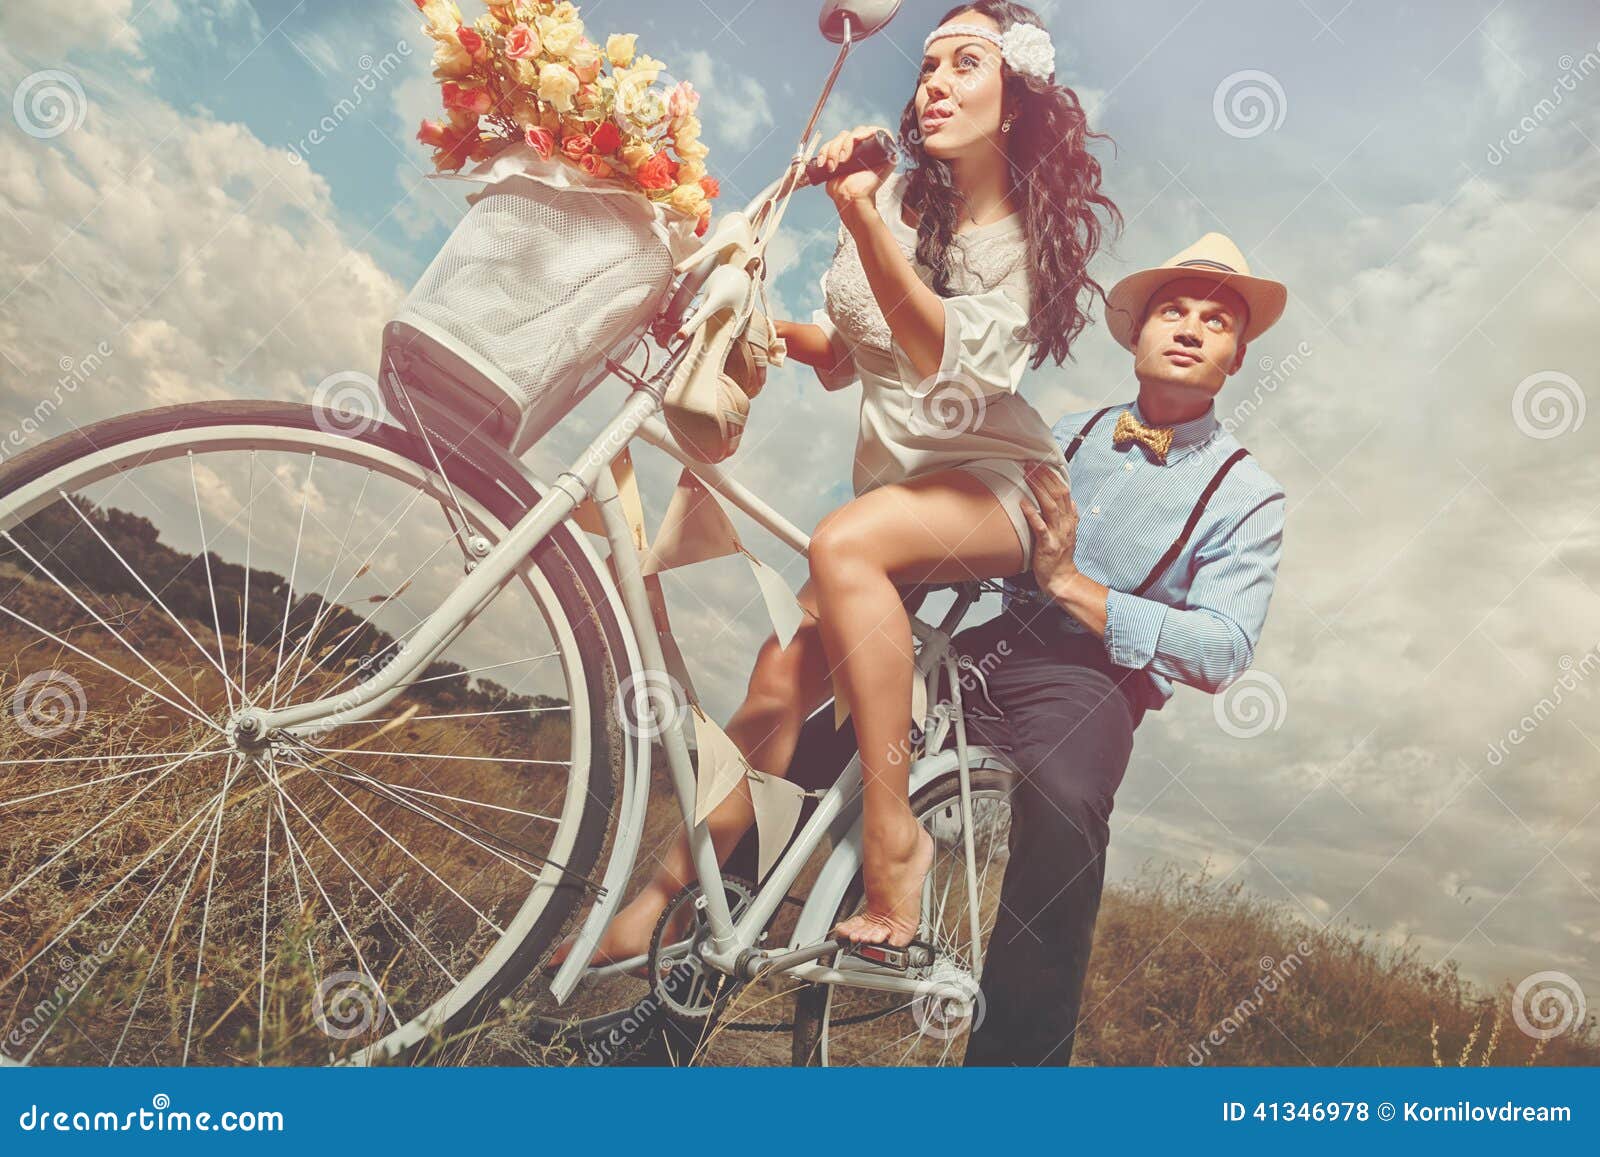 https://thumbs.dreamstime.com/z/vintage-wedding-groom-bride-bicycle-just-married-sign-cans-attached-41346978.jpg?ct=jpeg